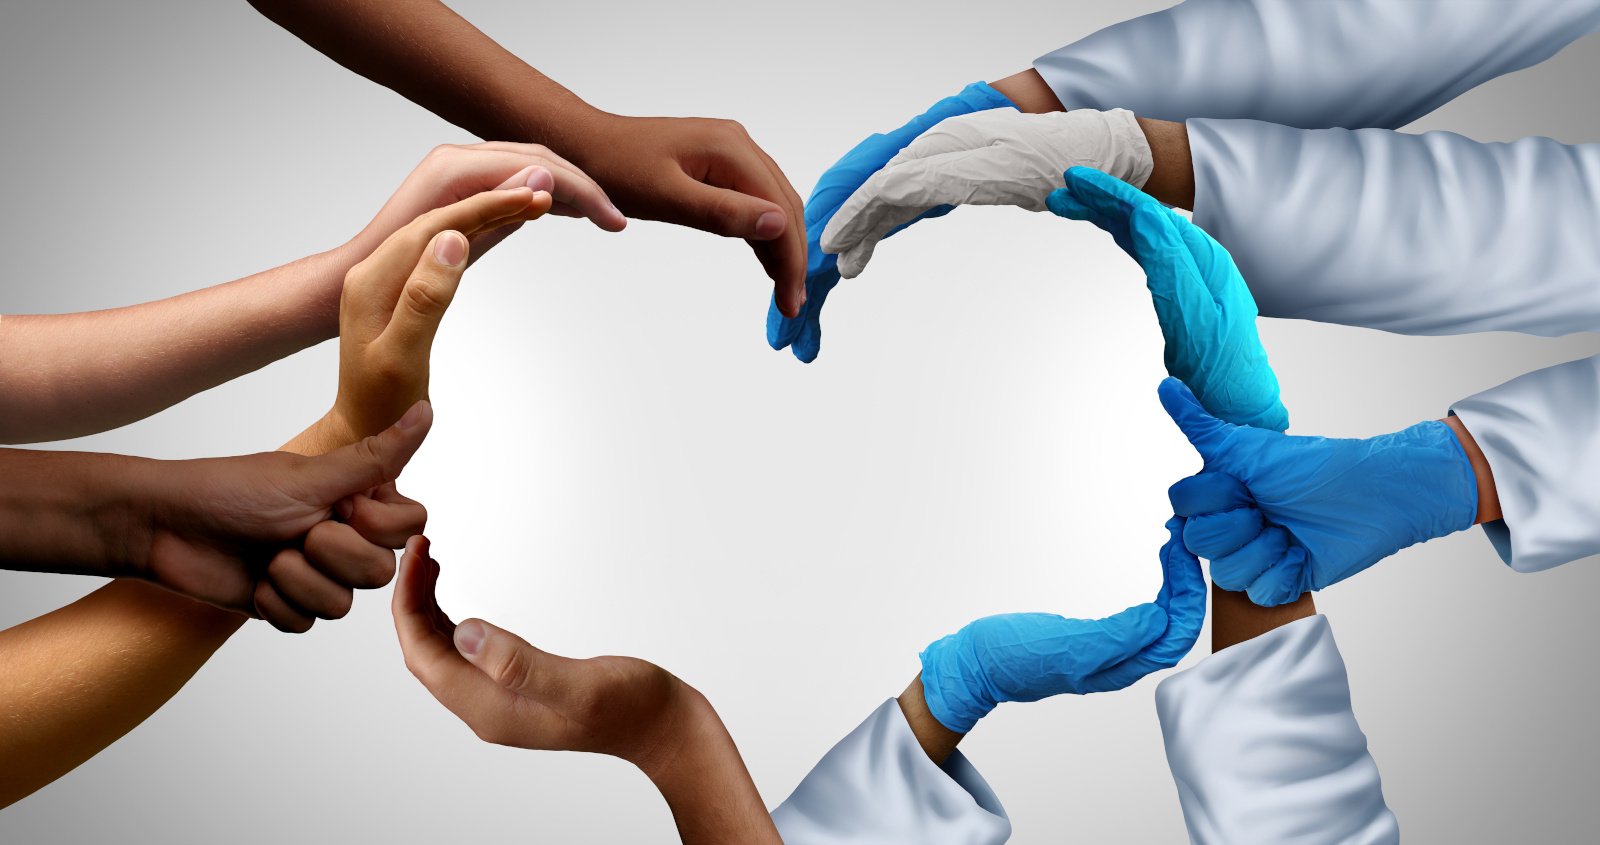 Team working concept image: healthcare staff linking hands to form heart